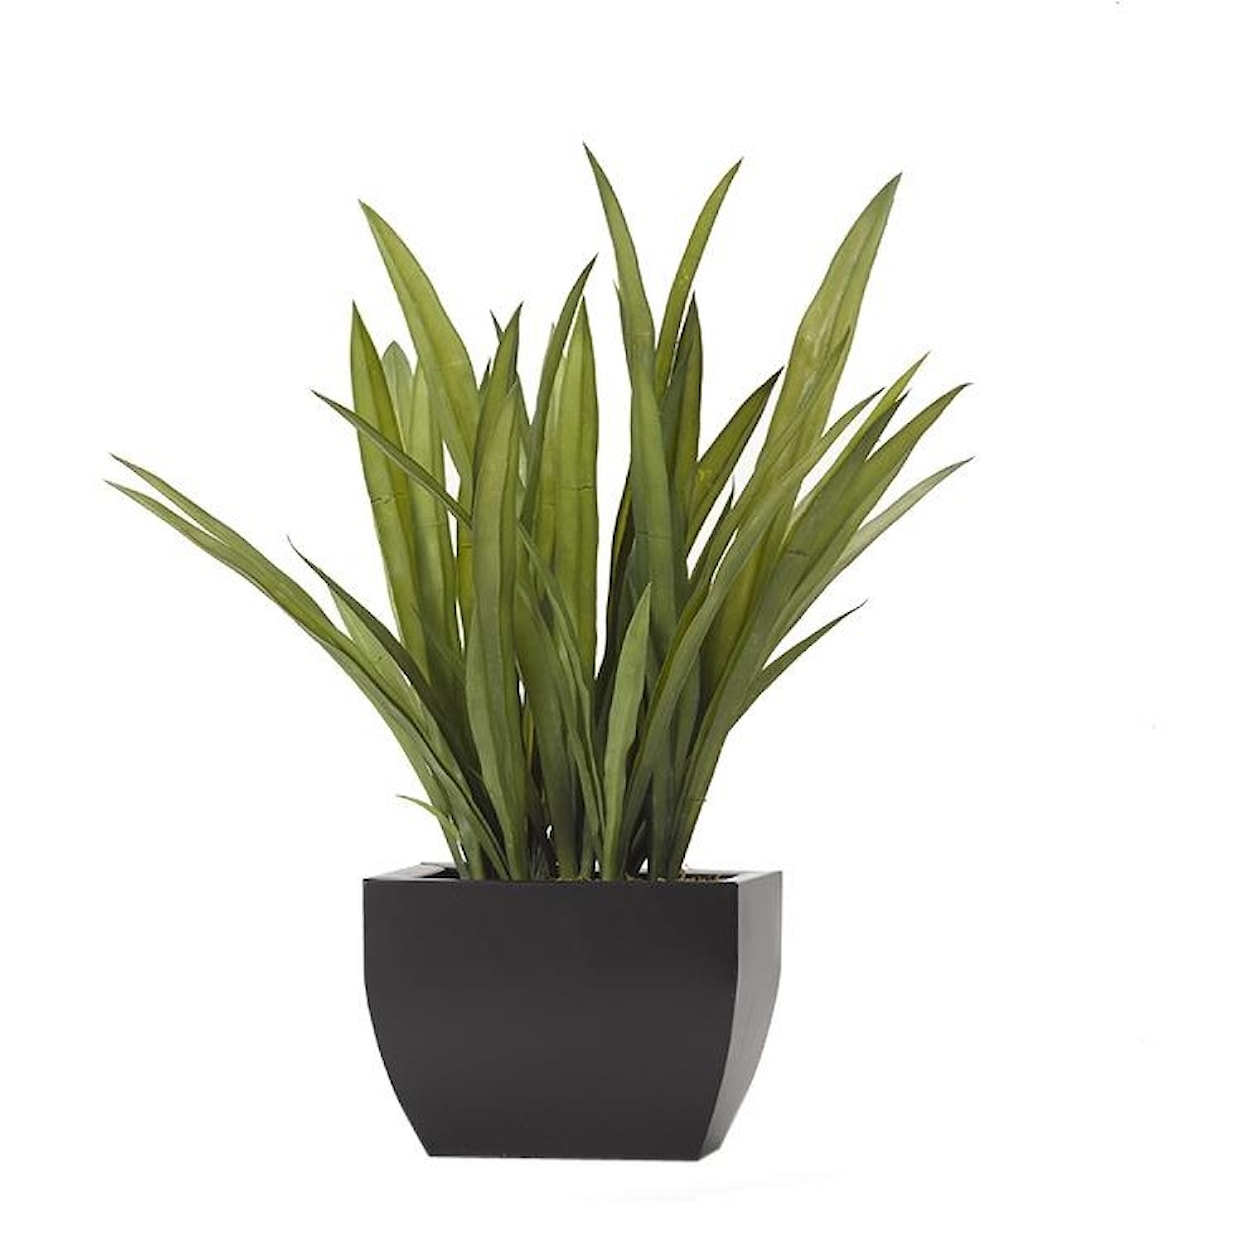 D&W Silks Table Top Tall Orchid Foliage in Planter